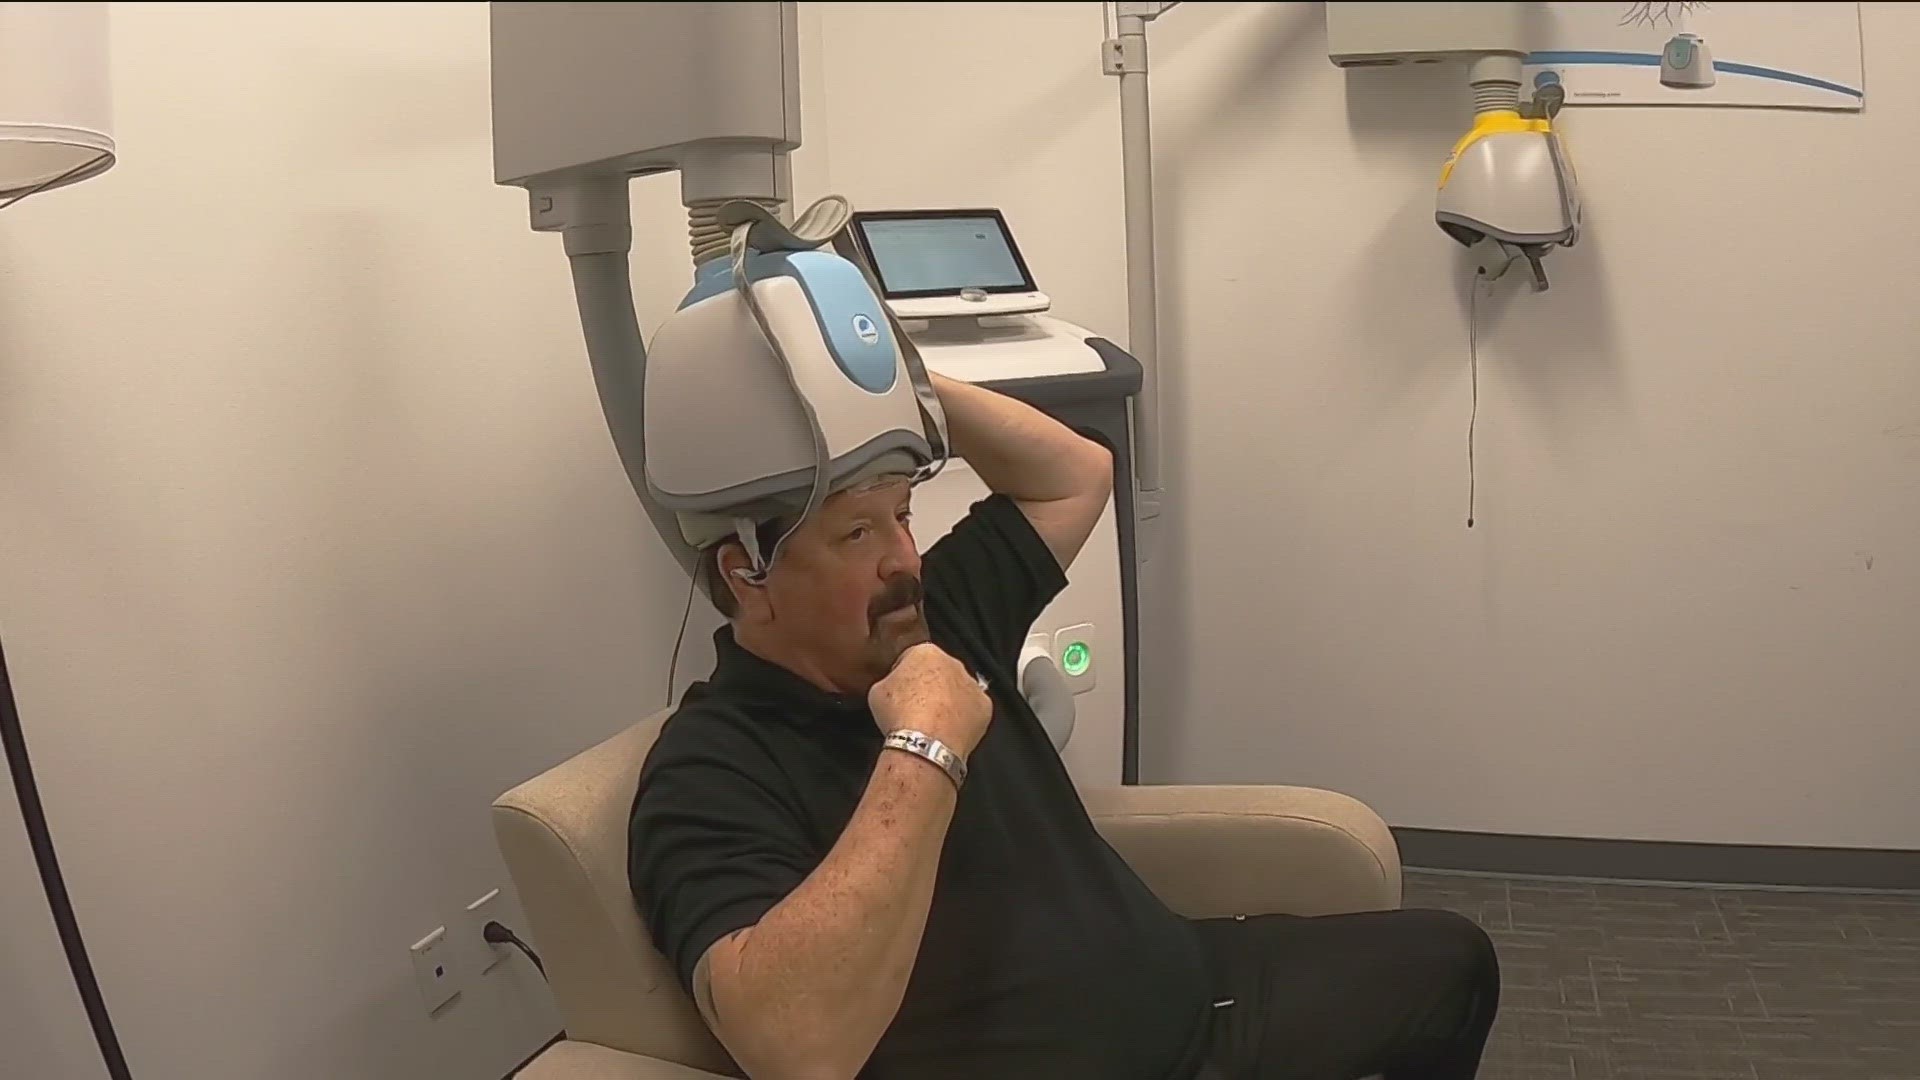 Veteran Bill Waite struggled with anxiety, depression, and PTSD for decades until he discovered a transformative therapy called Transcranial Magnetic Stimulation.